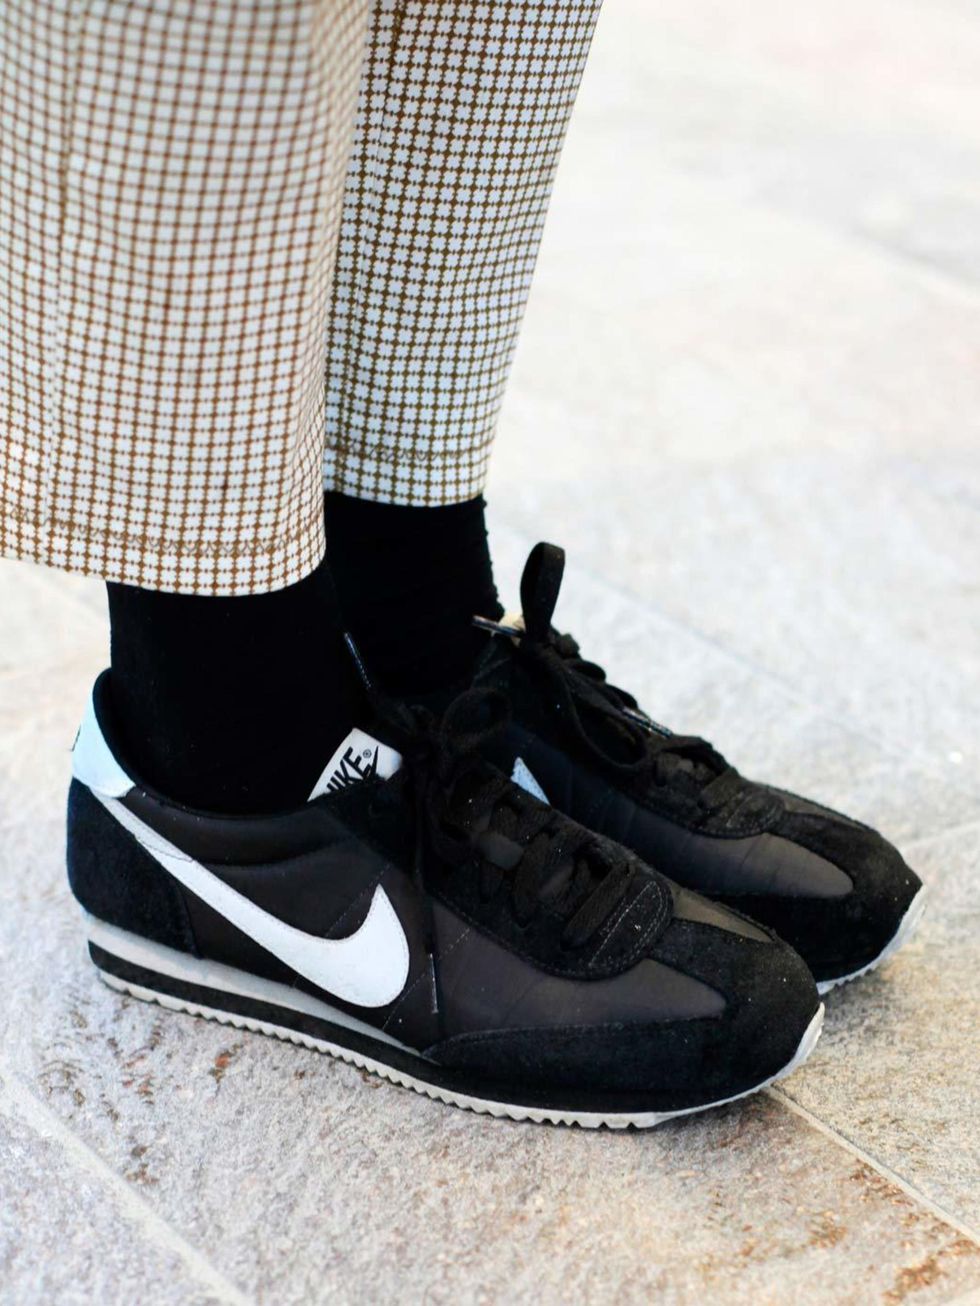 <p>Alice, 21, student. Vintage trousers, Nike trainers.</p><p>Photo by Silvia Olsen @AntheaSimms</p>